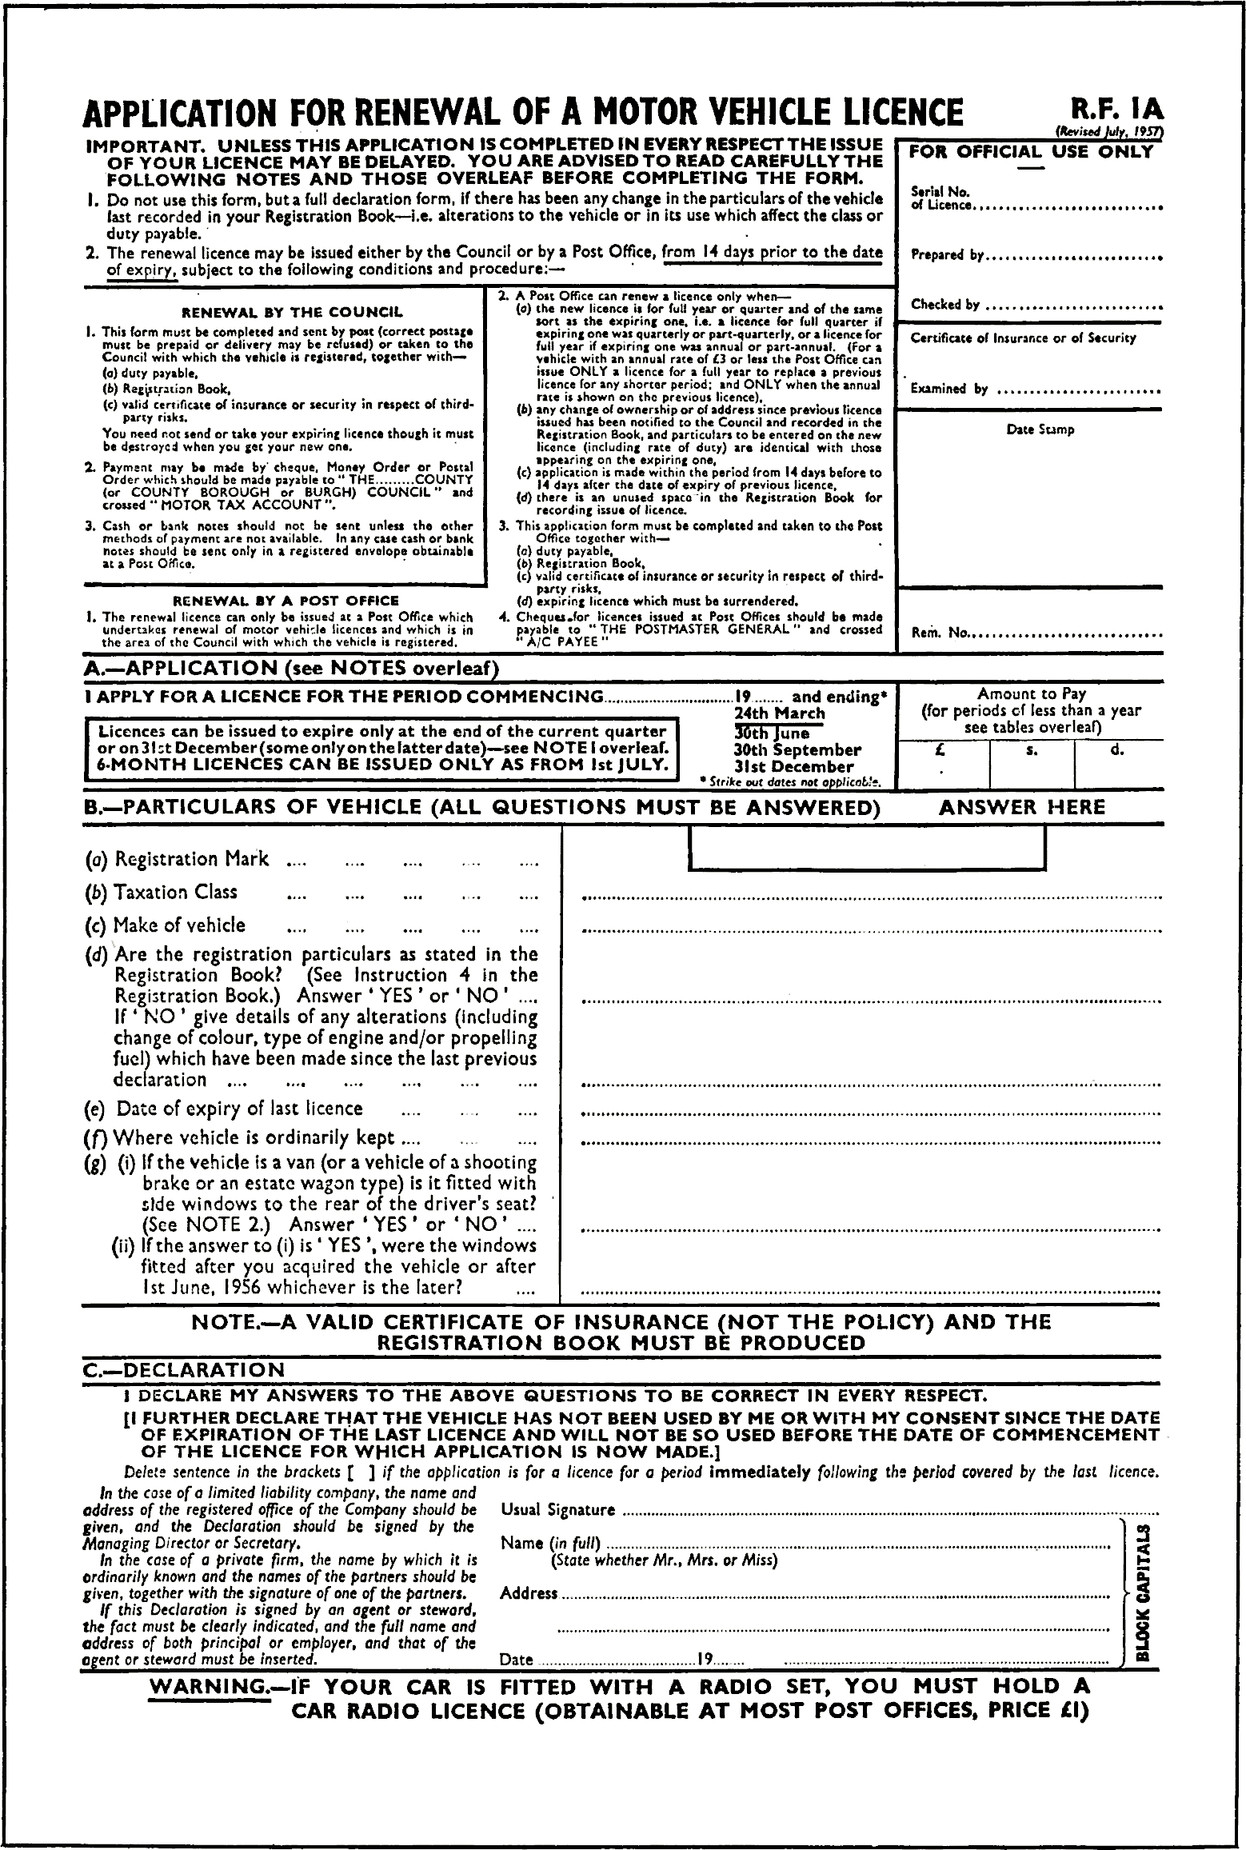 Form with title APPLICATION FOR RENEWAL OF A MOTOR VEHICLE LICENCE.
R.F. 1A.
(Revised July, 1957).
1\. Do not use this form, but a full declaration form, if there has been any change in the particulars of the vehicle
last recorded in your Registration Book—i.e. alterations to the vehicle or in its use which affect the class or
duty payable.
2\. The renewal licence may be issued either by the Council or by a Post Office, from 14 days prior to the date
of expiry, subject to the following conditions and procedure:-
Section RENEWAL BY THE COUNCIL
1\. This form must be completed and sent by post (correct postage must be prepaid or delivery may be refused) or taken to the Council with which the vehicle is registered, together with—
(a) duty payable,
(b) Registration Book,
(c) valid certificate of insurance of security in respect of third-party risks.
You need not send or take your expiring licence though it must be destroyed when you get your new one.
2\. Payment may be made by cheque, Money Order or Postal Order which should be made payable to  THE.........COUNTY
(or COUNTY BOROUGH or BURGH) COUNCIL” and
crossed “MOTOR TAX ACCOUNT”.
3\. Cash or bank notes should not be sent unless the other
methods of payment are not available. In any case cash or bank notes should be sent only in a registered envelope obtainable at a Post Office.
Section RENEWAL BY A POST OFFICE
1\. The renewal licence can only be issued at a Post Office which
undertakes renewal of motor vehicle licences and which is in
the area of the Council with which the vehicle is registered.
2\. A Post Office can renew a licence only when—
(a) the new licence is for full year or quarter and of the same
sort as the expiring one, i.e. a licence for full quarter if
expiring one was quarterly or part-quarterly, or licence for
full year if expiring one was annual or part-annual. (For
vehicle with an annual rate of £3 or less the Post Office can
issue ONLY a licence for a full year to replace a previous
licence for any shorter period; and ONLY when the annual
rate is shown on the previous licence).
(b) any change of ownership or of address since previous licence issued has been notified to the Council and recorded in the Registration Book, and particulars to be entered on the new licence (including’ rate of duty) are identical with those
appearing on the expiring one.
(c) application is made within the period from 14 days before to 14 days alter the date of expiry of previous licence.
(d) there is an unused space in the Registration Book for
recording issue of licence.
3\. This application form must be completed and taken to the Post Office together with—
(a) duty payable.
(b) Registration Book.
(c) valid certificate of insurance or security in respect of third-party risks.
(d) expiring licence which must be surrendered.
4\. Cheques for licences issued ac Post Officer should be made
payable to THE POSTMASTER GENERAL” and crossed “A/C PAYEE”.
Section FOR OFFICIAL USE ONLY
Serial No. of Licence, blank field.
Prepared by, blank field.
Checked by, blank field.
Certificate of Insurance or of Security.
Examined by, blank field.
Date Stamp, blank field.
Rem. No. blank field.
Section A—APPLICATION (see NOTES overleaf).
I APPLY FOR A LICENCE FOR THE PERIOD COMMENCING, blank field, 19, blank field, and ending *.
\* Strike out dates not applicable.
24th March (underlined).
3th June.
30th September.
3st December.
Licences can be issued to expire only at the end of the current quarter or on 31st December (some only on the latter date)-see NOTE 1 overleaf.
6 MONTH LICENCES CAN BE ISSUED ONLY AS FROM 1st JULY.
Section Amount to Pay (for periods of less than a year see tables overleaf), £., blank field, s., blank field, d., blank field.
B.—PARTICULARS OF VEHICLE (ALL QUESTIONS MUST BE ANSWERED) ANSWER HERE.
(a) Registration Mark, 5 blank fields.
(b) Taxation Class, 5 blank fields.
(c) Make of vehicle, 5 blank fields.
(d) Are the registration particulars as stated in the
Registration Book? (See Instruction 4 in the
Registration Book.) Answer ‘YES’ or ‘NO’ , blank field.
If ‘NO’ give details of any alterations (including
change of colour, type of engine and/or propelling
fuel) which have been made since the last previous
declaration, 6 blank fields.
(e) Date of expiry of last licence, 3 blank fields.
(f) Where vehicle is ordinarily kept, 3 blank fields.
(g) (i) If the vehicle is a van (or a vehicle of a shooting
brake or an estate wagon type) is it fitted with side windows to the rear of the driver’s seat?
(See NOTE 2.) Answer ‘YES’ or ‘NO’, blank field.
(ii) If the answer to (i) is ‘YES’, were the windows
fitted after you acquired the vehicle or after 1st June, 1986 whichever is the later?,  blank field.
NOTE.—A VALID CERTIFICATE OF INSURANCE (NOT THE POLICY) AND THE REGISTRATION BOOK MUST BE PRODUCED.
C.—DECLARATION.
I DECLARE MY ANSWERS TO THE ABOVE QUESTIONS TO BE CORRECT IN EVERY RESPECT.
[I FURTHER DECLARE THAT THE VEHICLE HAS NOT BEEN USED BY ME OR WITH MY CONSENT SINCE THE DATE
OF EXPIRATION OF THE LAST LICENCE AND WILL NOT BE SO USED BEFORE THE DATE OF COMMENCEMENT
OF THE LICENCE FOR WHICH APPLICATION IS NOW MADE.].
Delete sentence in the brackets [ ] if the application is for a licence for a period immediately following the period covered by the last licence.
In the case of a limited liability company, the name and
address of the registered office of the Company should be
given, and the Declaration should be signed by the
Managing Director or Secretary.
In the case of a private firm, the name by which it is
ordinarily known and the names of the partners should be
given, together with the signature of one of the partners.
If this Declaration is signed by an agent or steward,
the fact must be clearly indicated, and the full name and
address of both principal or employer, and that of the
agent or steward must be inserted.
(In block capitals).
Usual Signature, blank field.
Name (in full) (State whether Mr., Mrs. or Miss), blank field.
Address, blank field.
Date, blank field, 19, blank field.
WARNING—IF YOUR CAR IS FITTED WITH A RADIO SET, YOU MUST HOLD A CAR RADIO LICENCE (OBTAINABLE AT MOST POST OFFICES, PRICE £1)